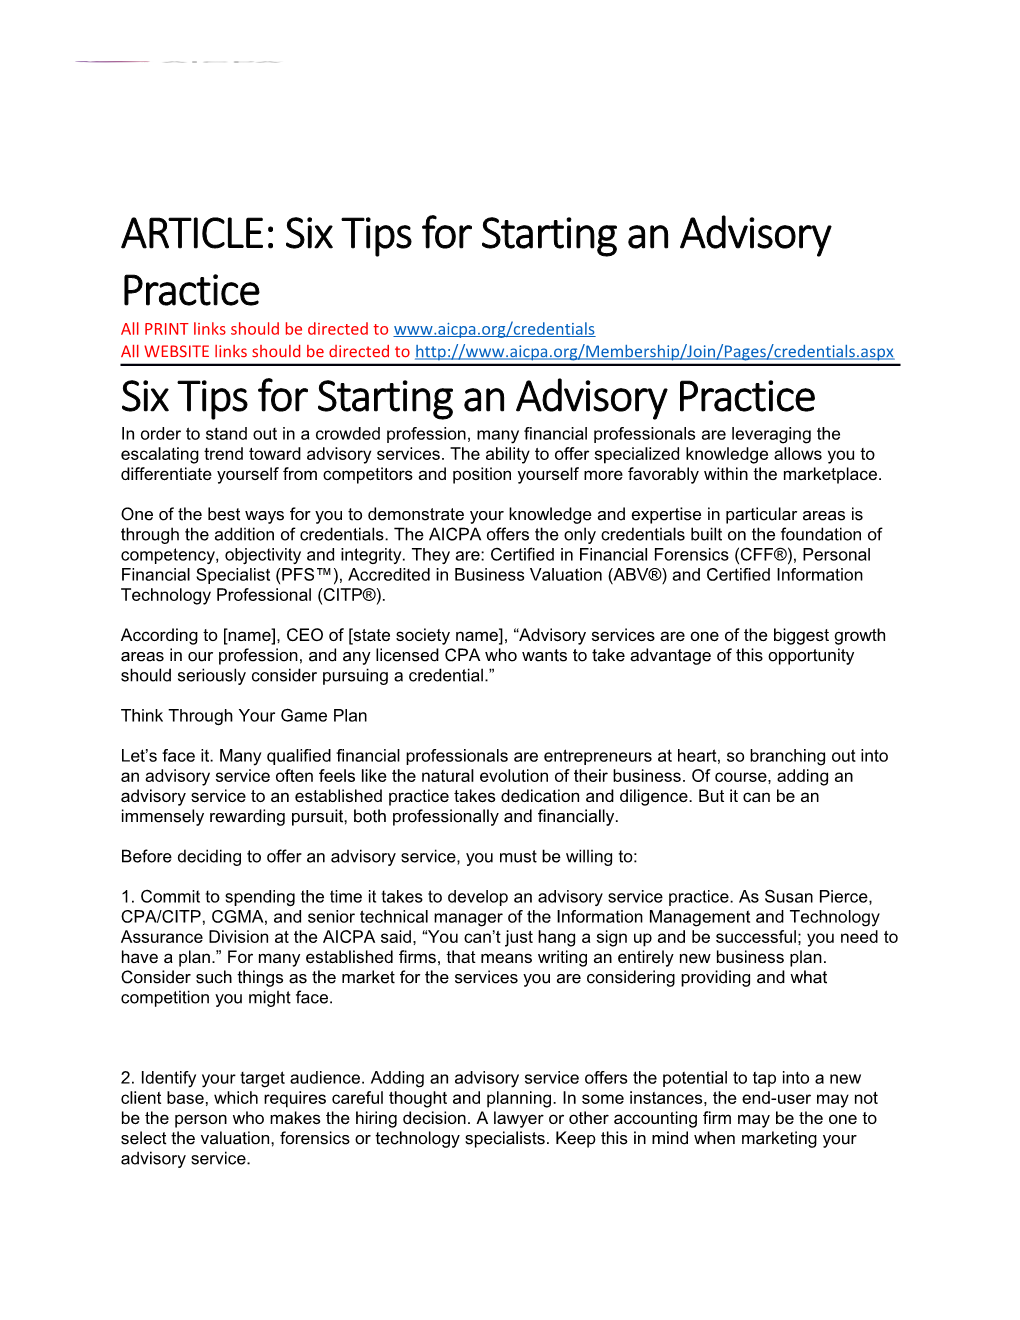 ARTICLE: Six Tips for Starting an Advisory Practice